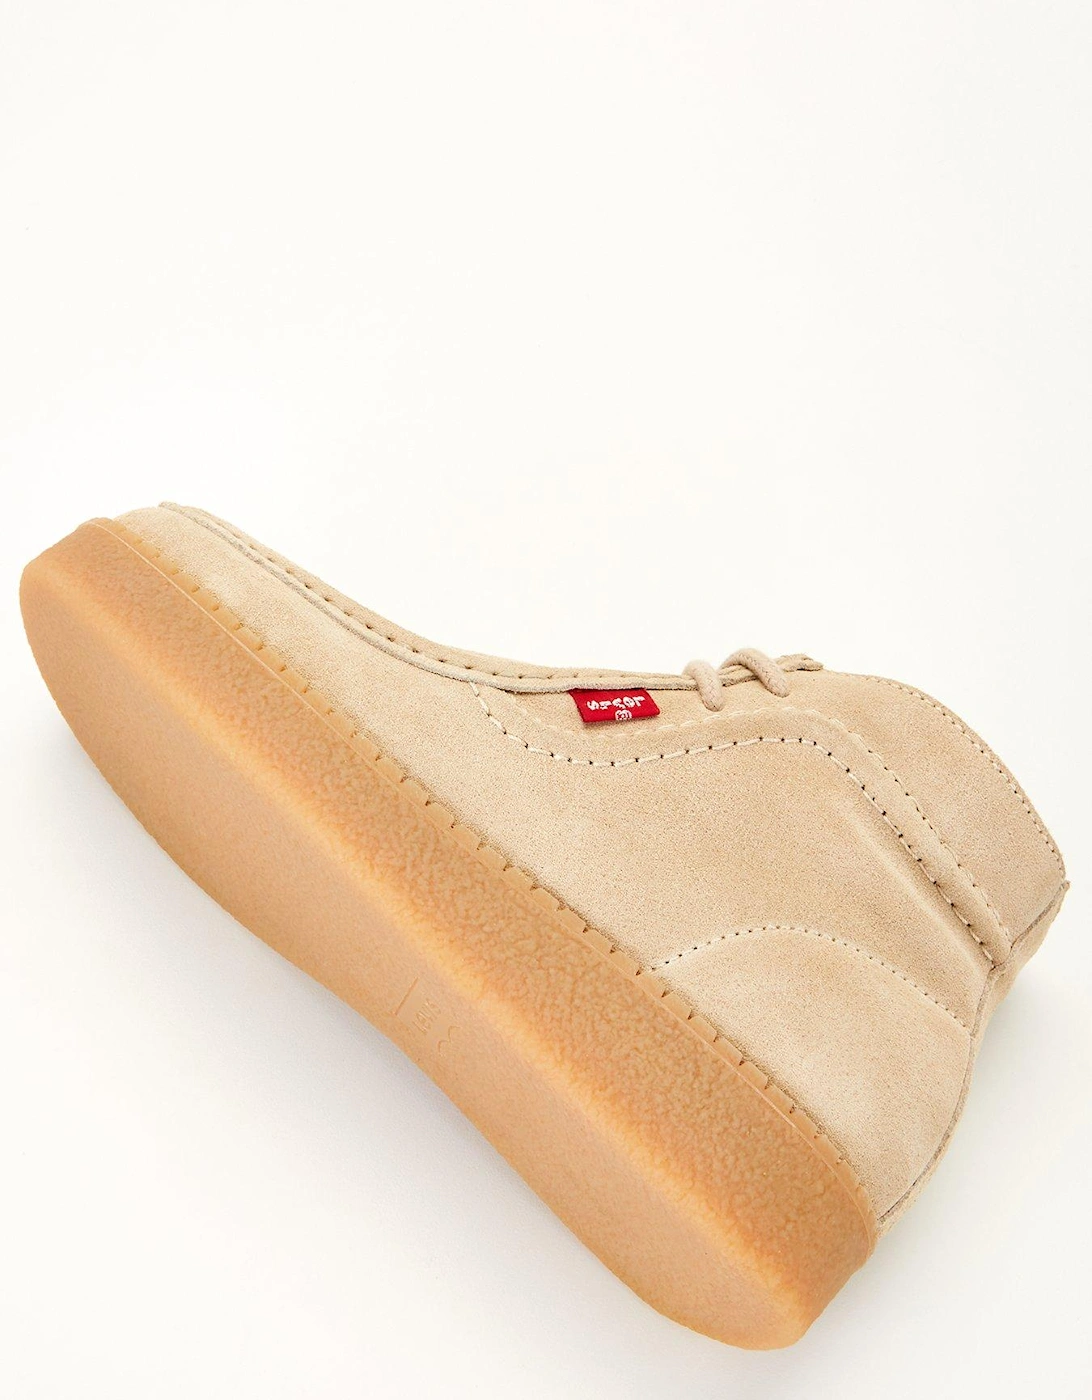 Suede Red Tab Boot - Beige